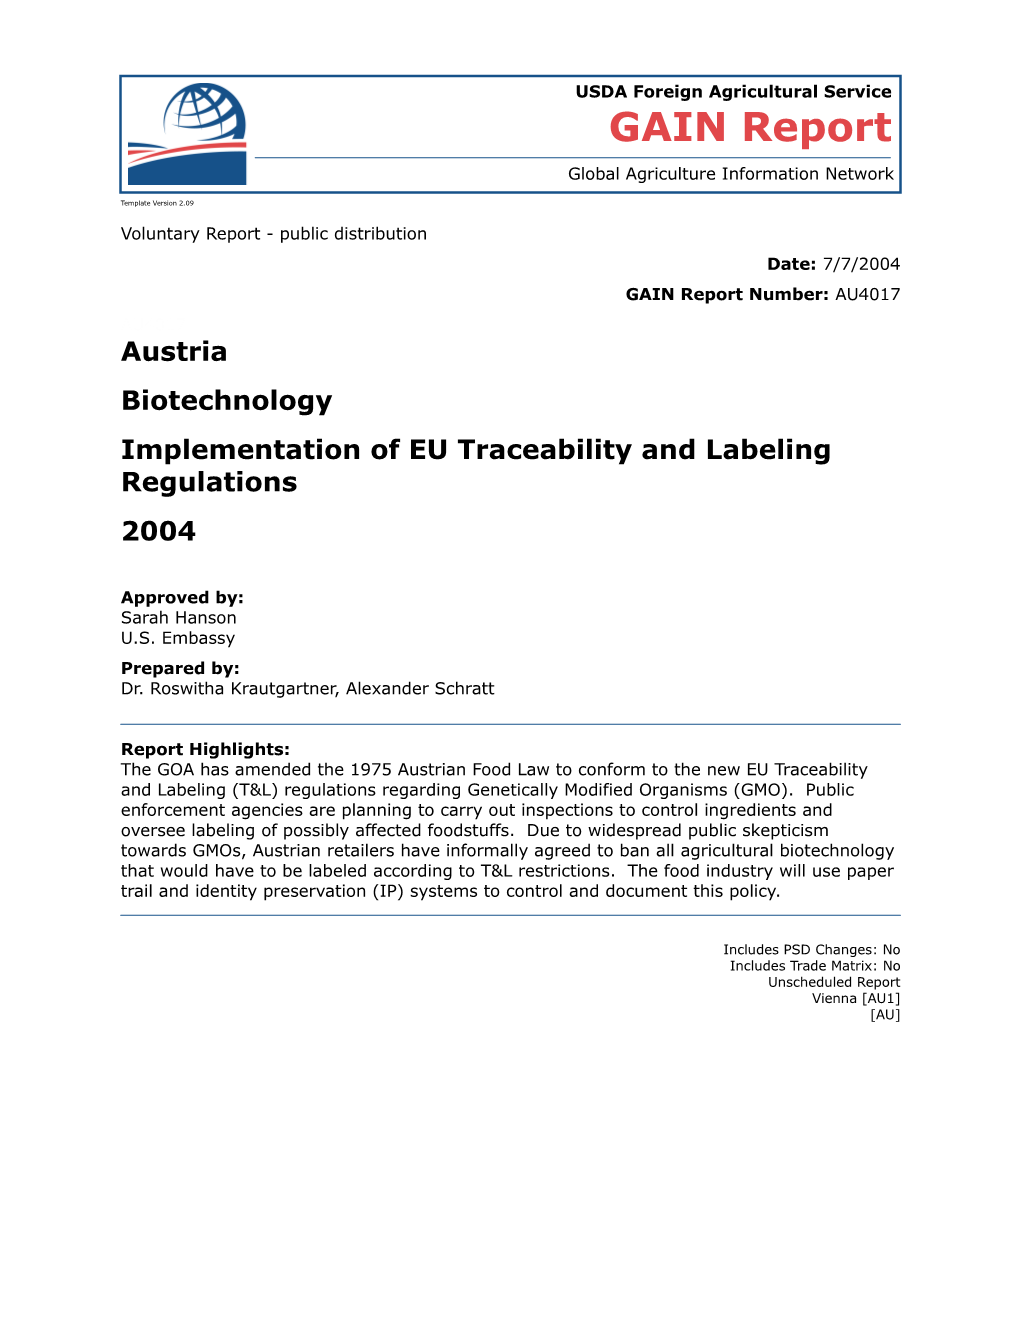 Implementation of EU Traceability and Labeling Regulations